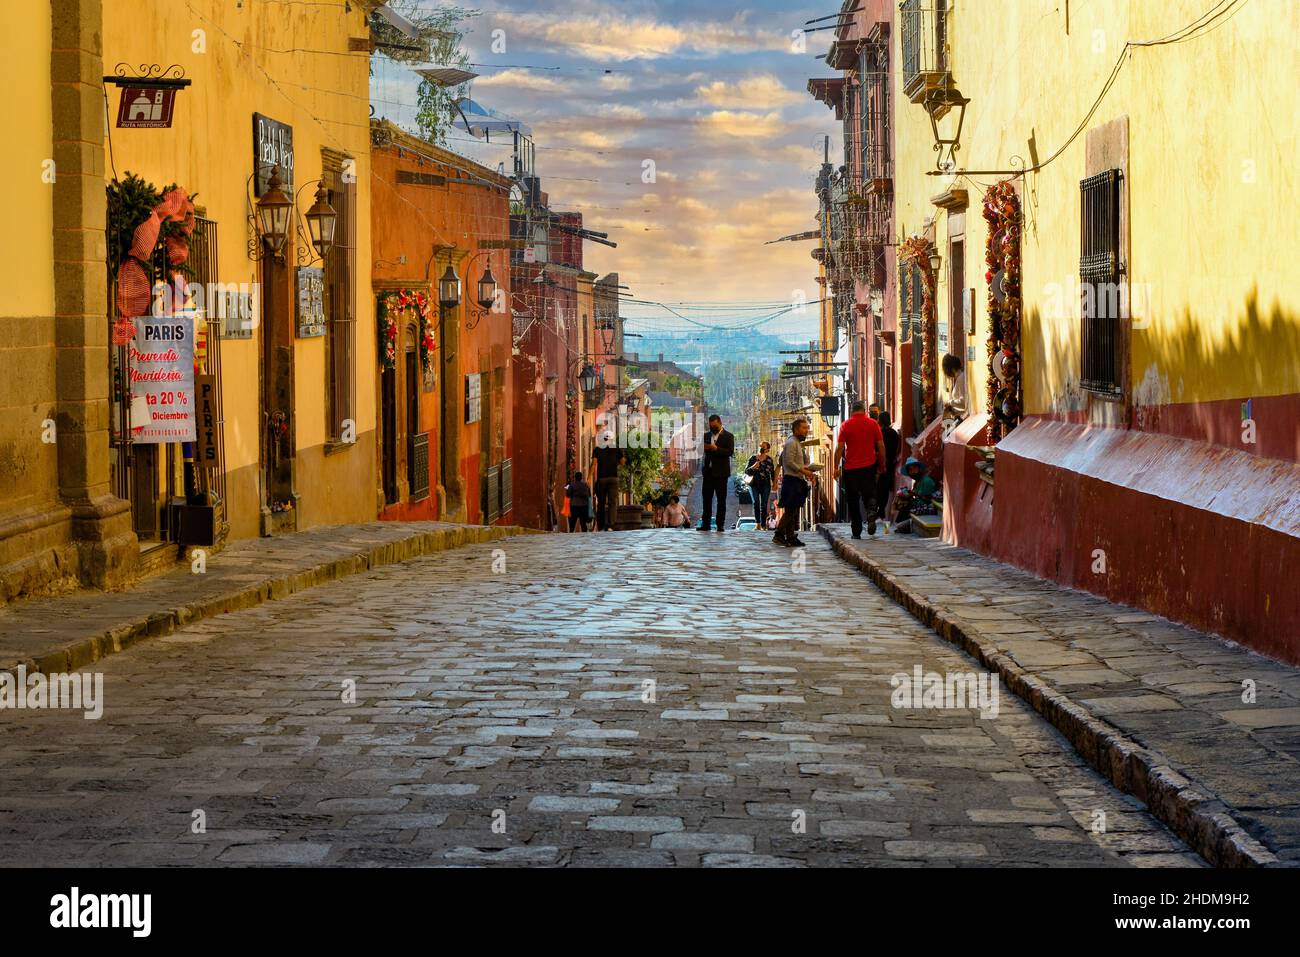 Sun setting on busy cobblestone street in the El Centro off the El Jardin with shops and cafes in the colonial city of San Miguel de Allende, MX Stock Photo